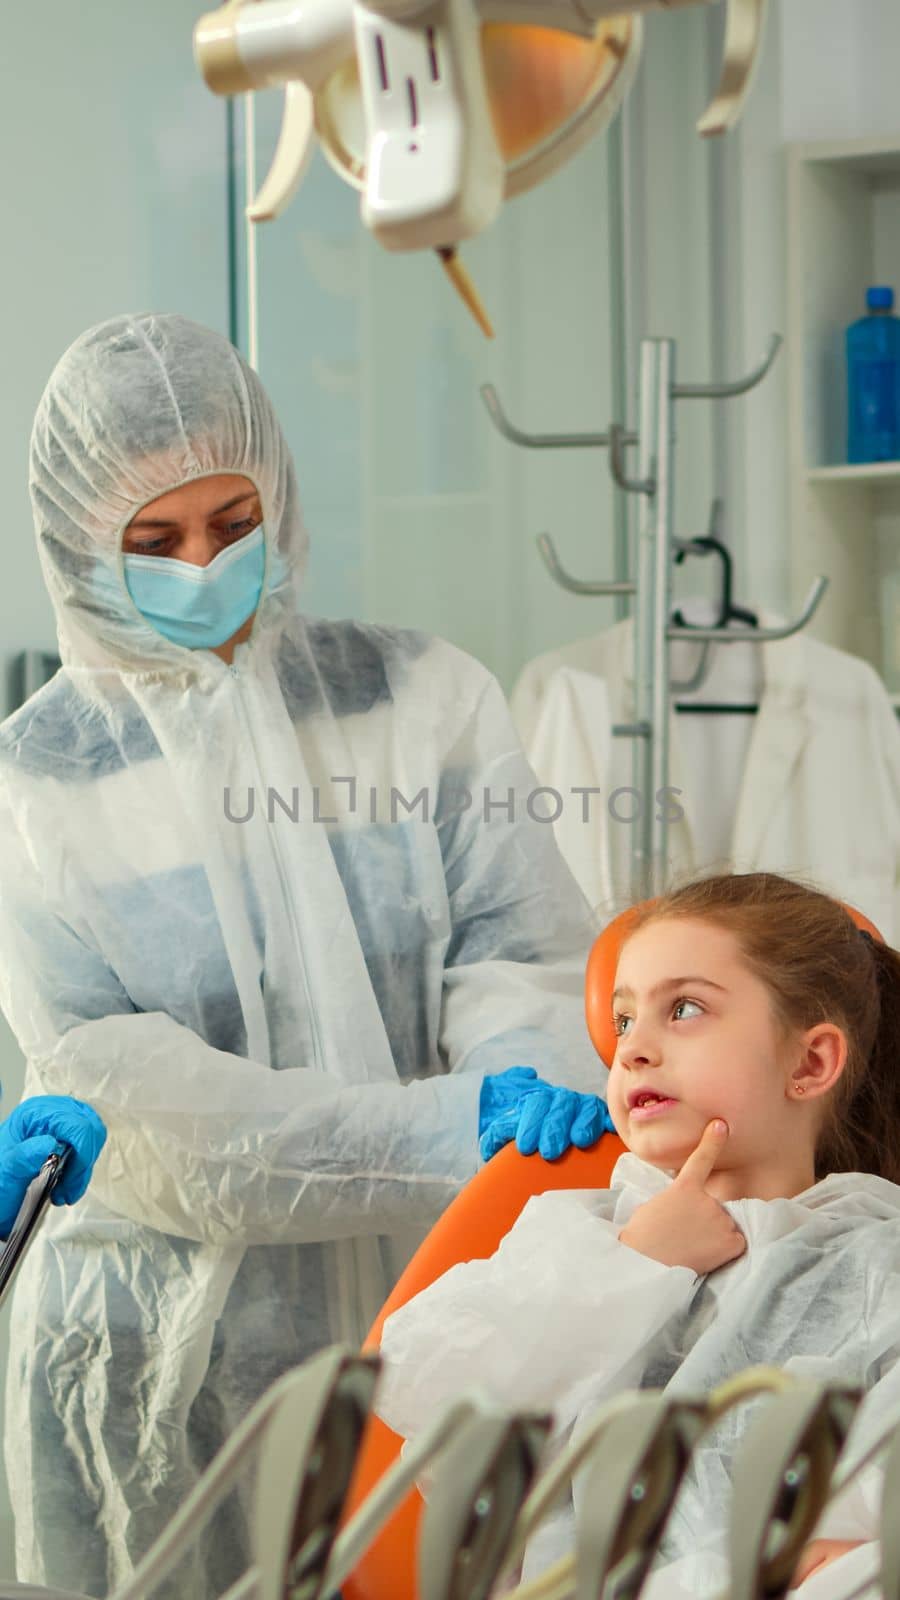 Dentist doctor in ppe suit taking notes on clipboard about little patient by DCStudio